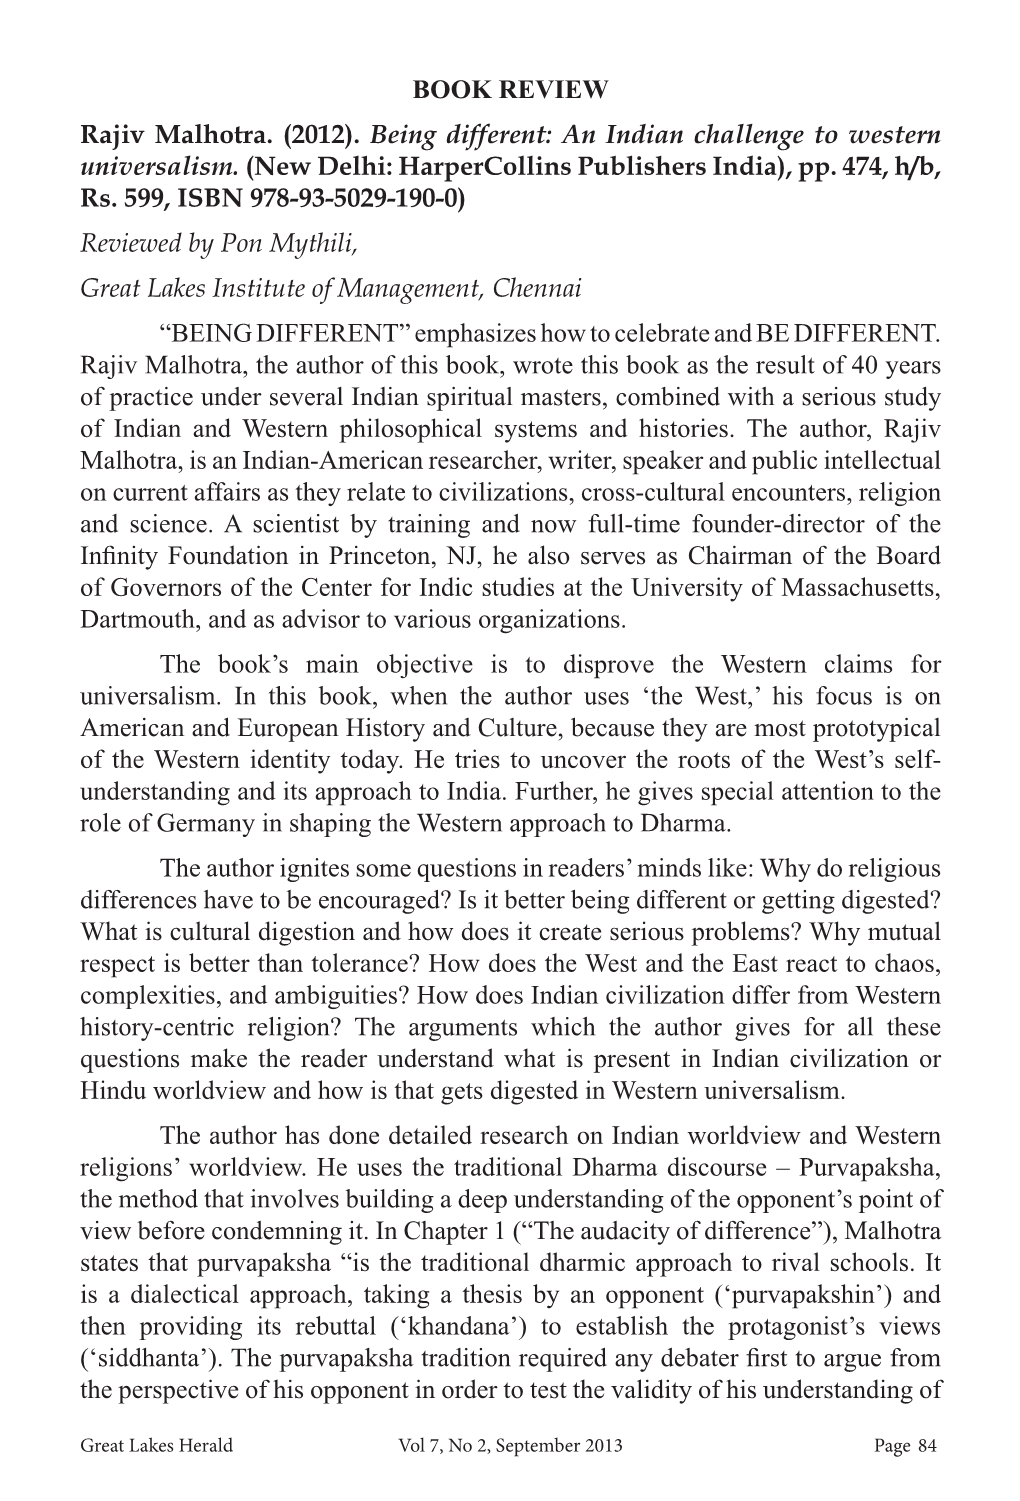 BOOK REVIEW Rajiv Malhotra. (2012). Being Different: an Indian Challenge to Western Universalism